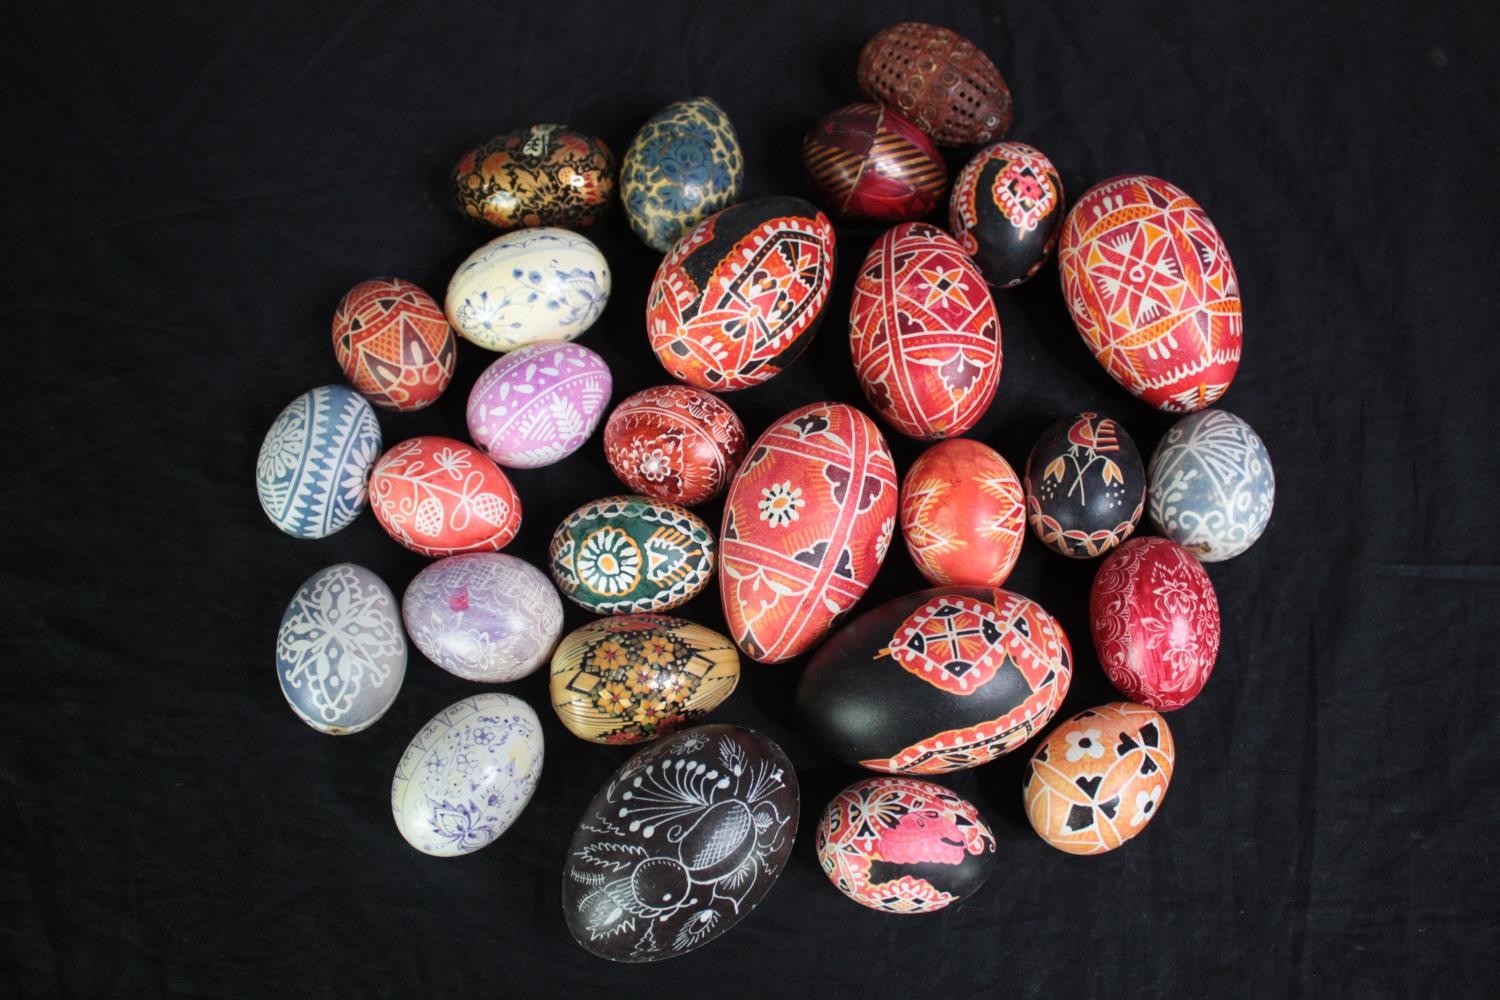 A collection of Czech Kraslice eggs. Hand painted with intricate patterns. H.9 cm. (largest)